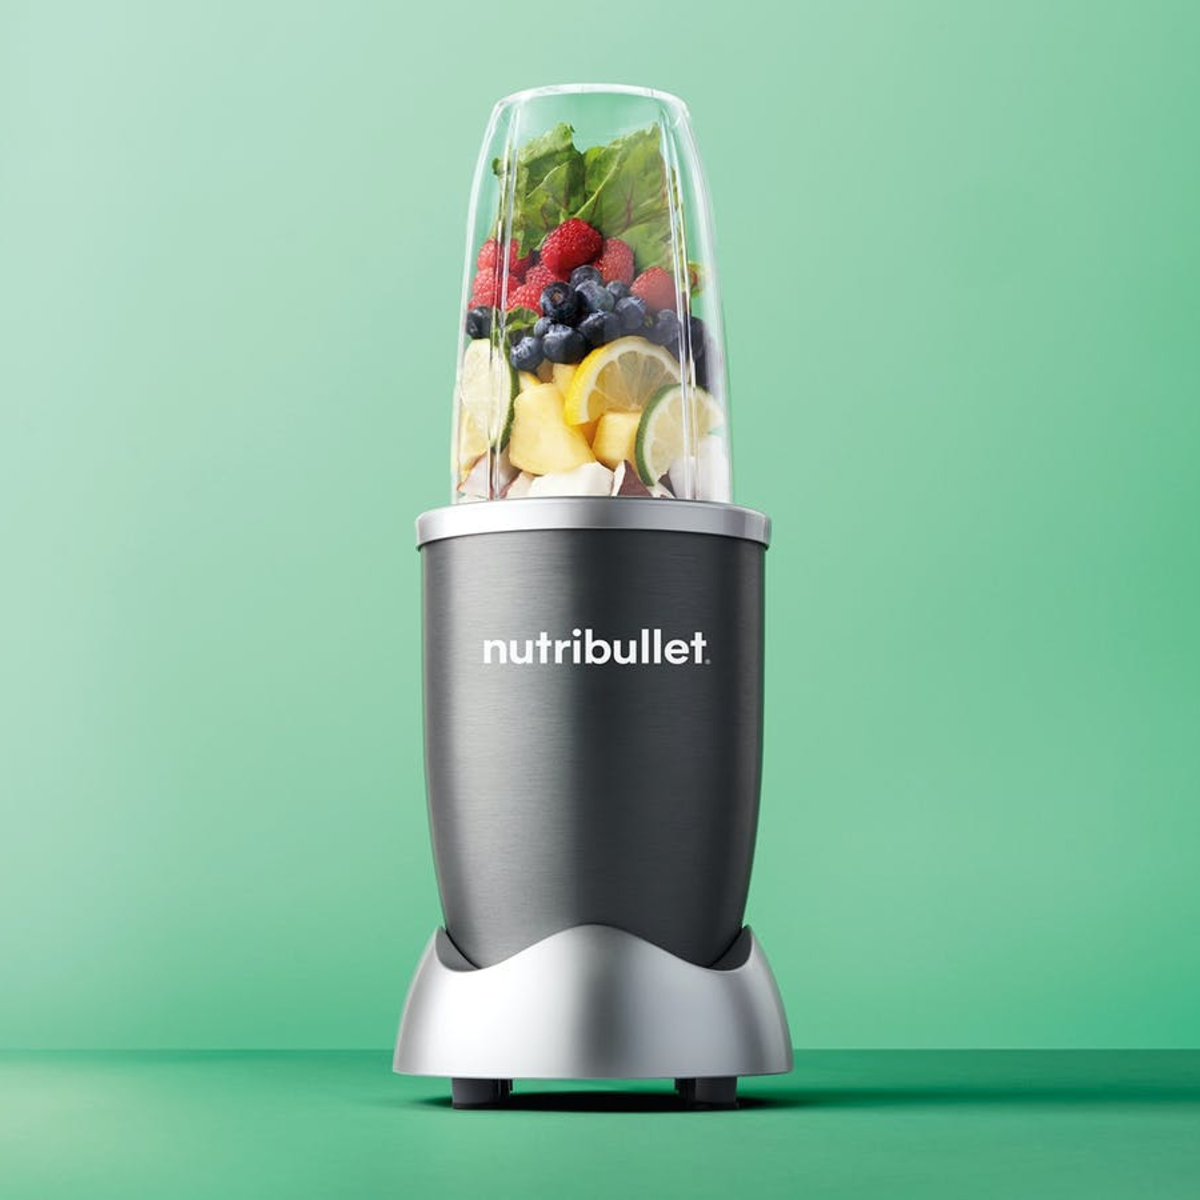 Magic Bullet Personal Blender now $15 in early Black Friday